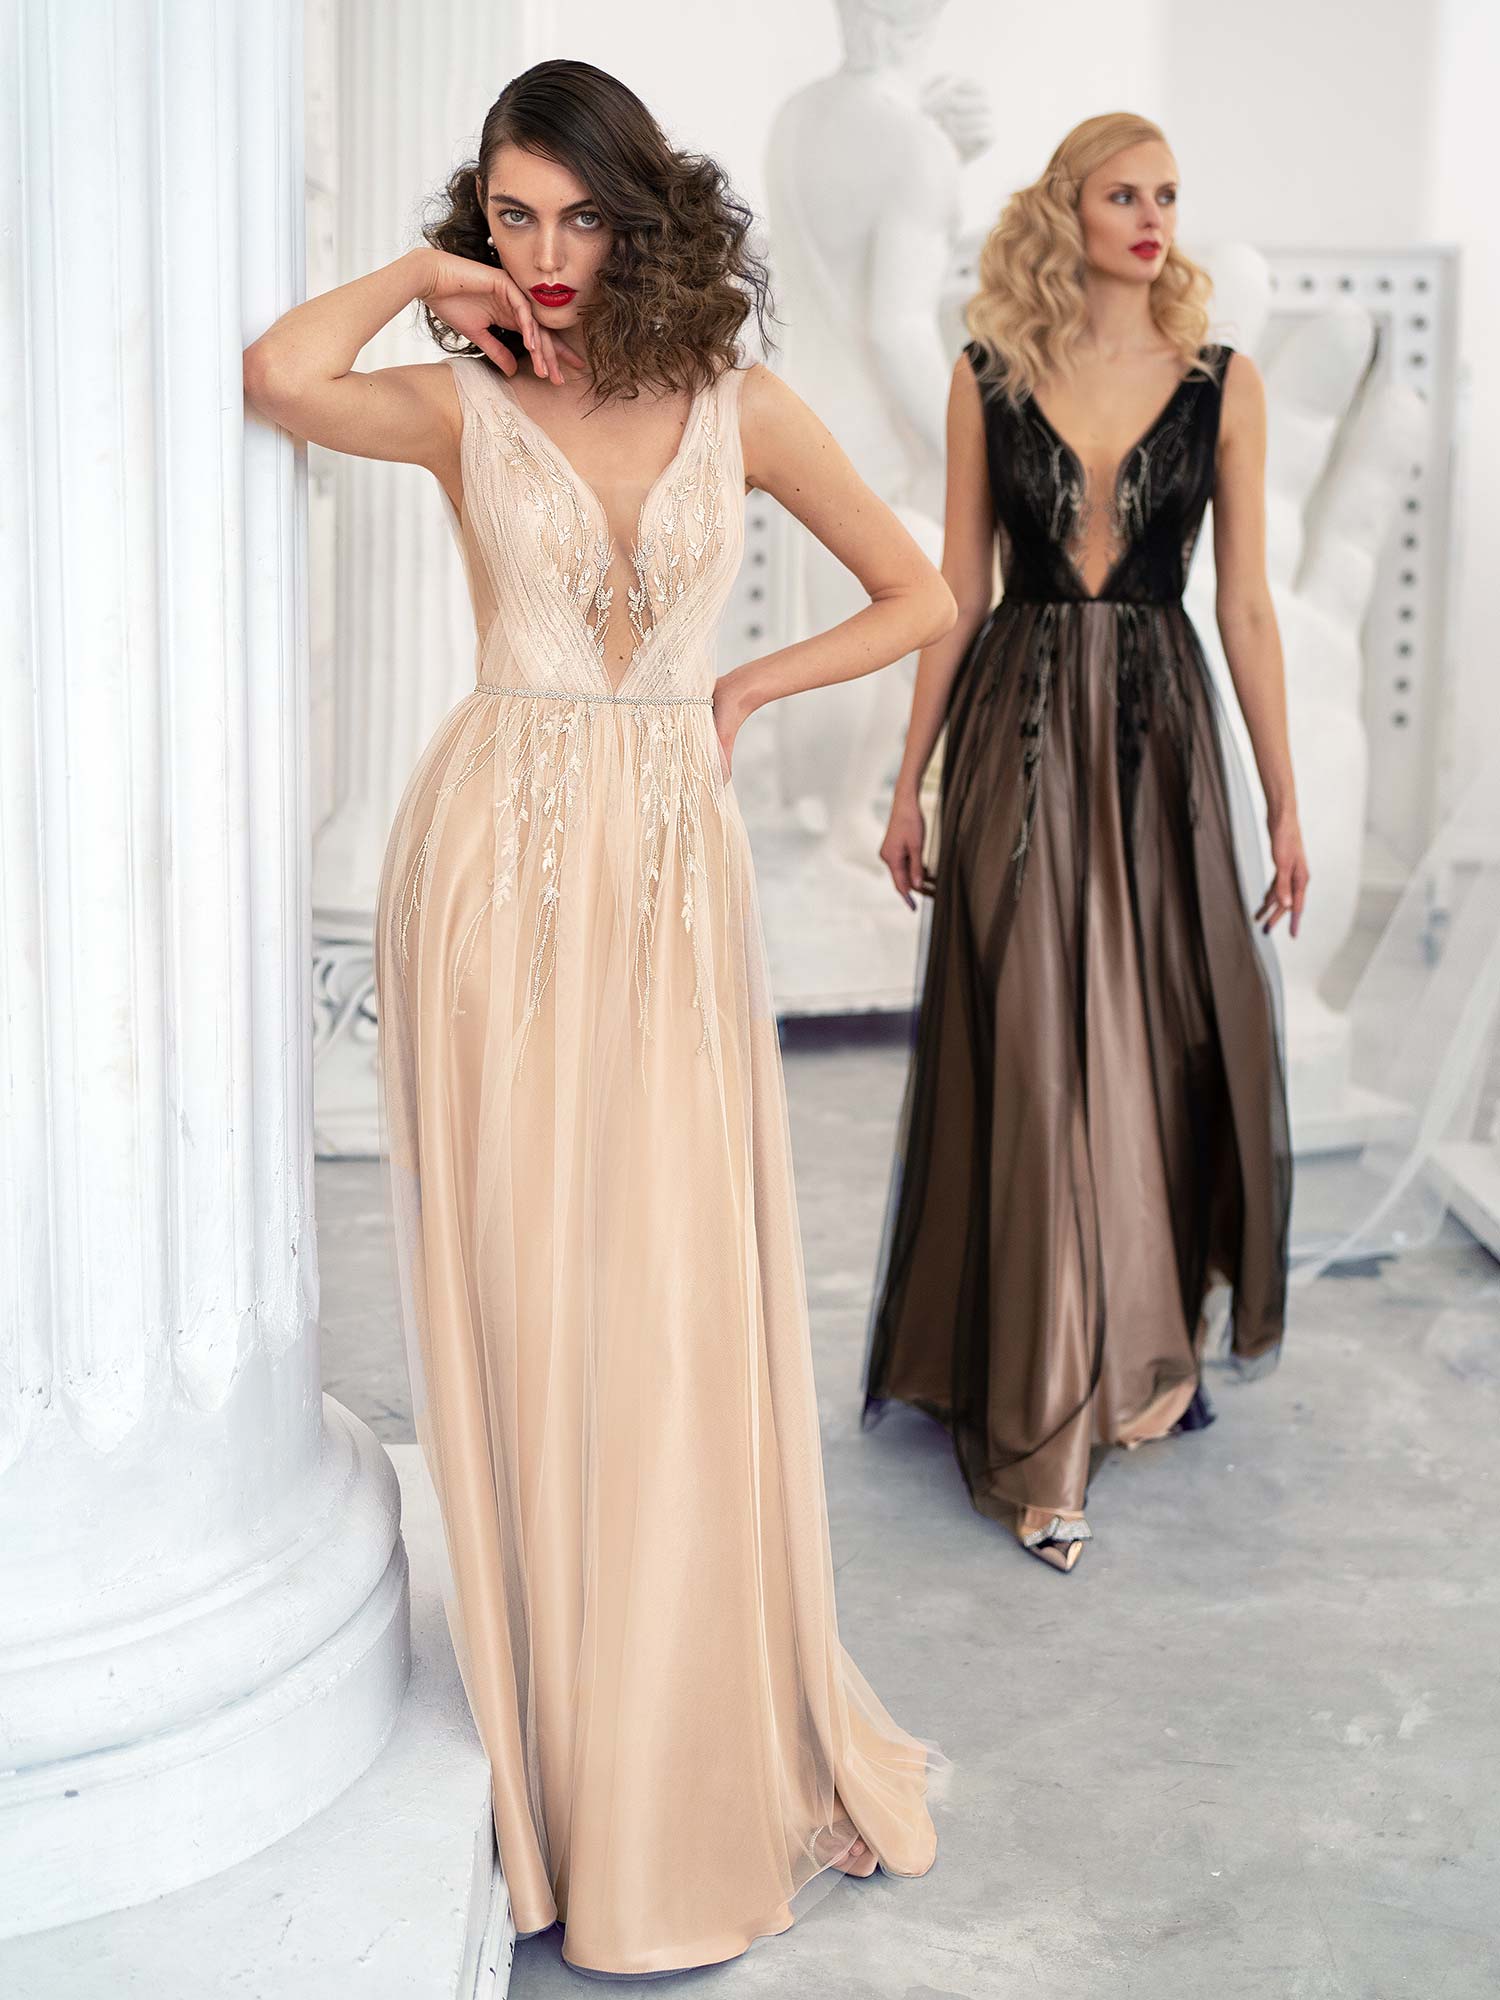 Style #654, A-line evening gown with a plunging neckline, open back and slit down the skirt; available in gold, black